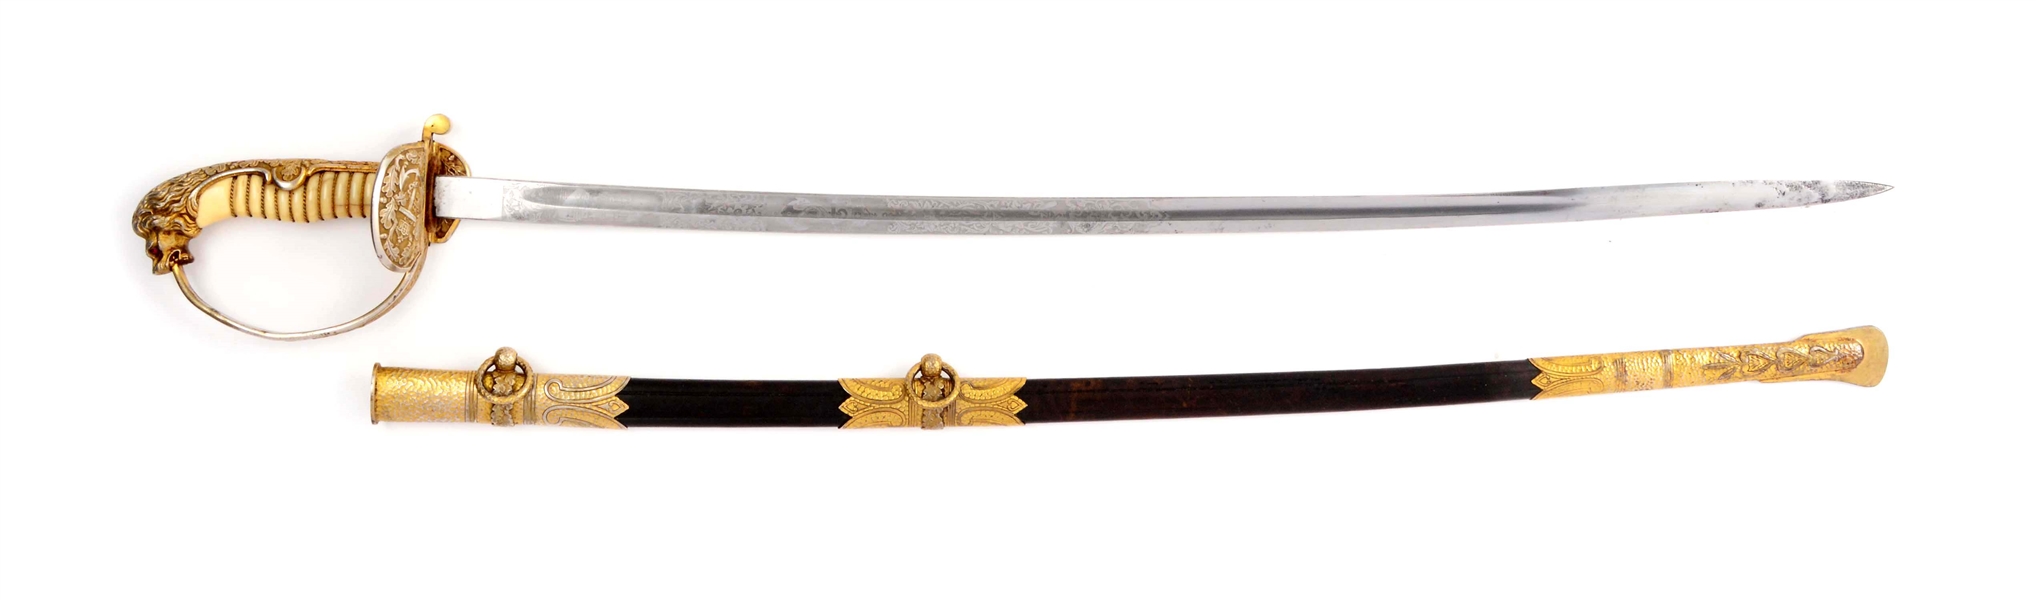 INSCRIBED WWI IMPERIAL GERMAN NAVAL SWORD ATTRIBUTED TO DIETRICH. 